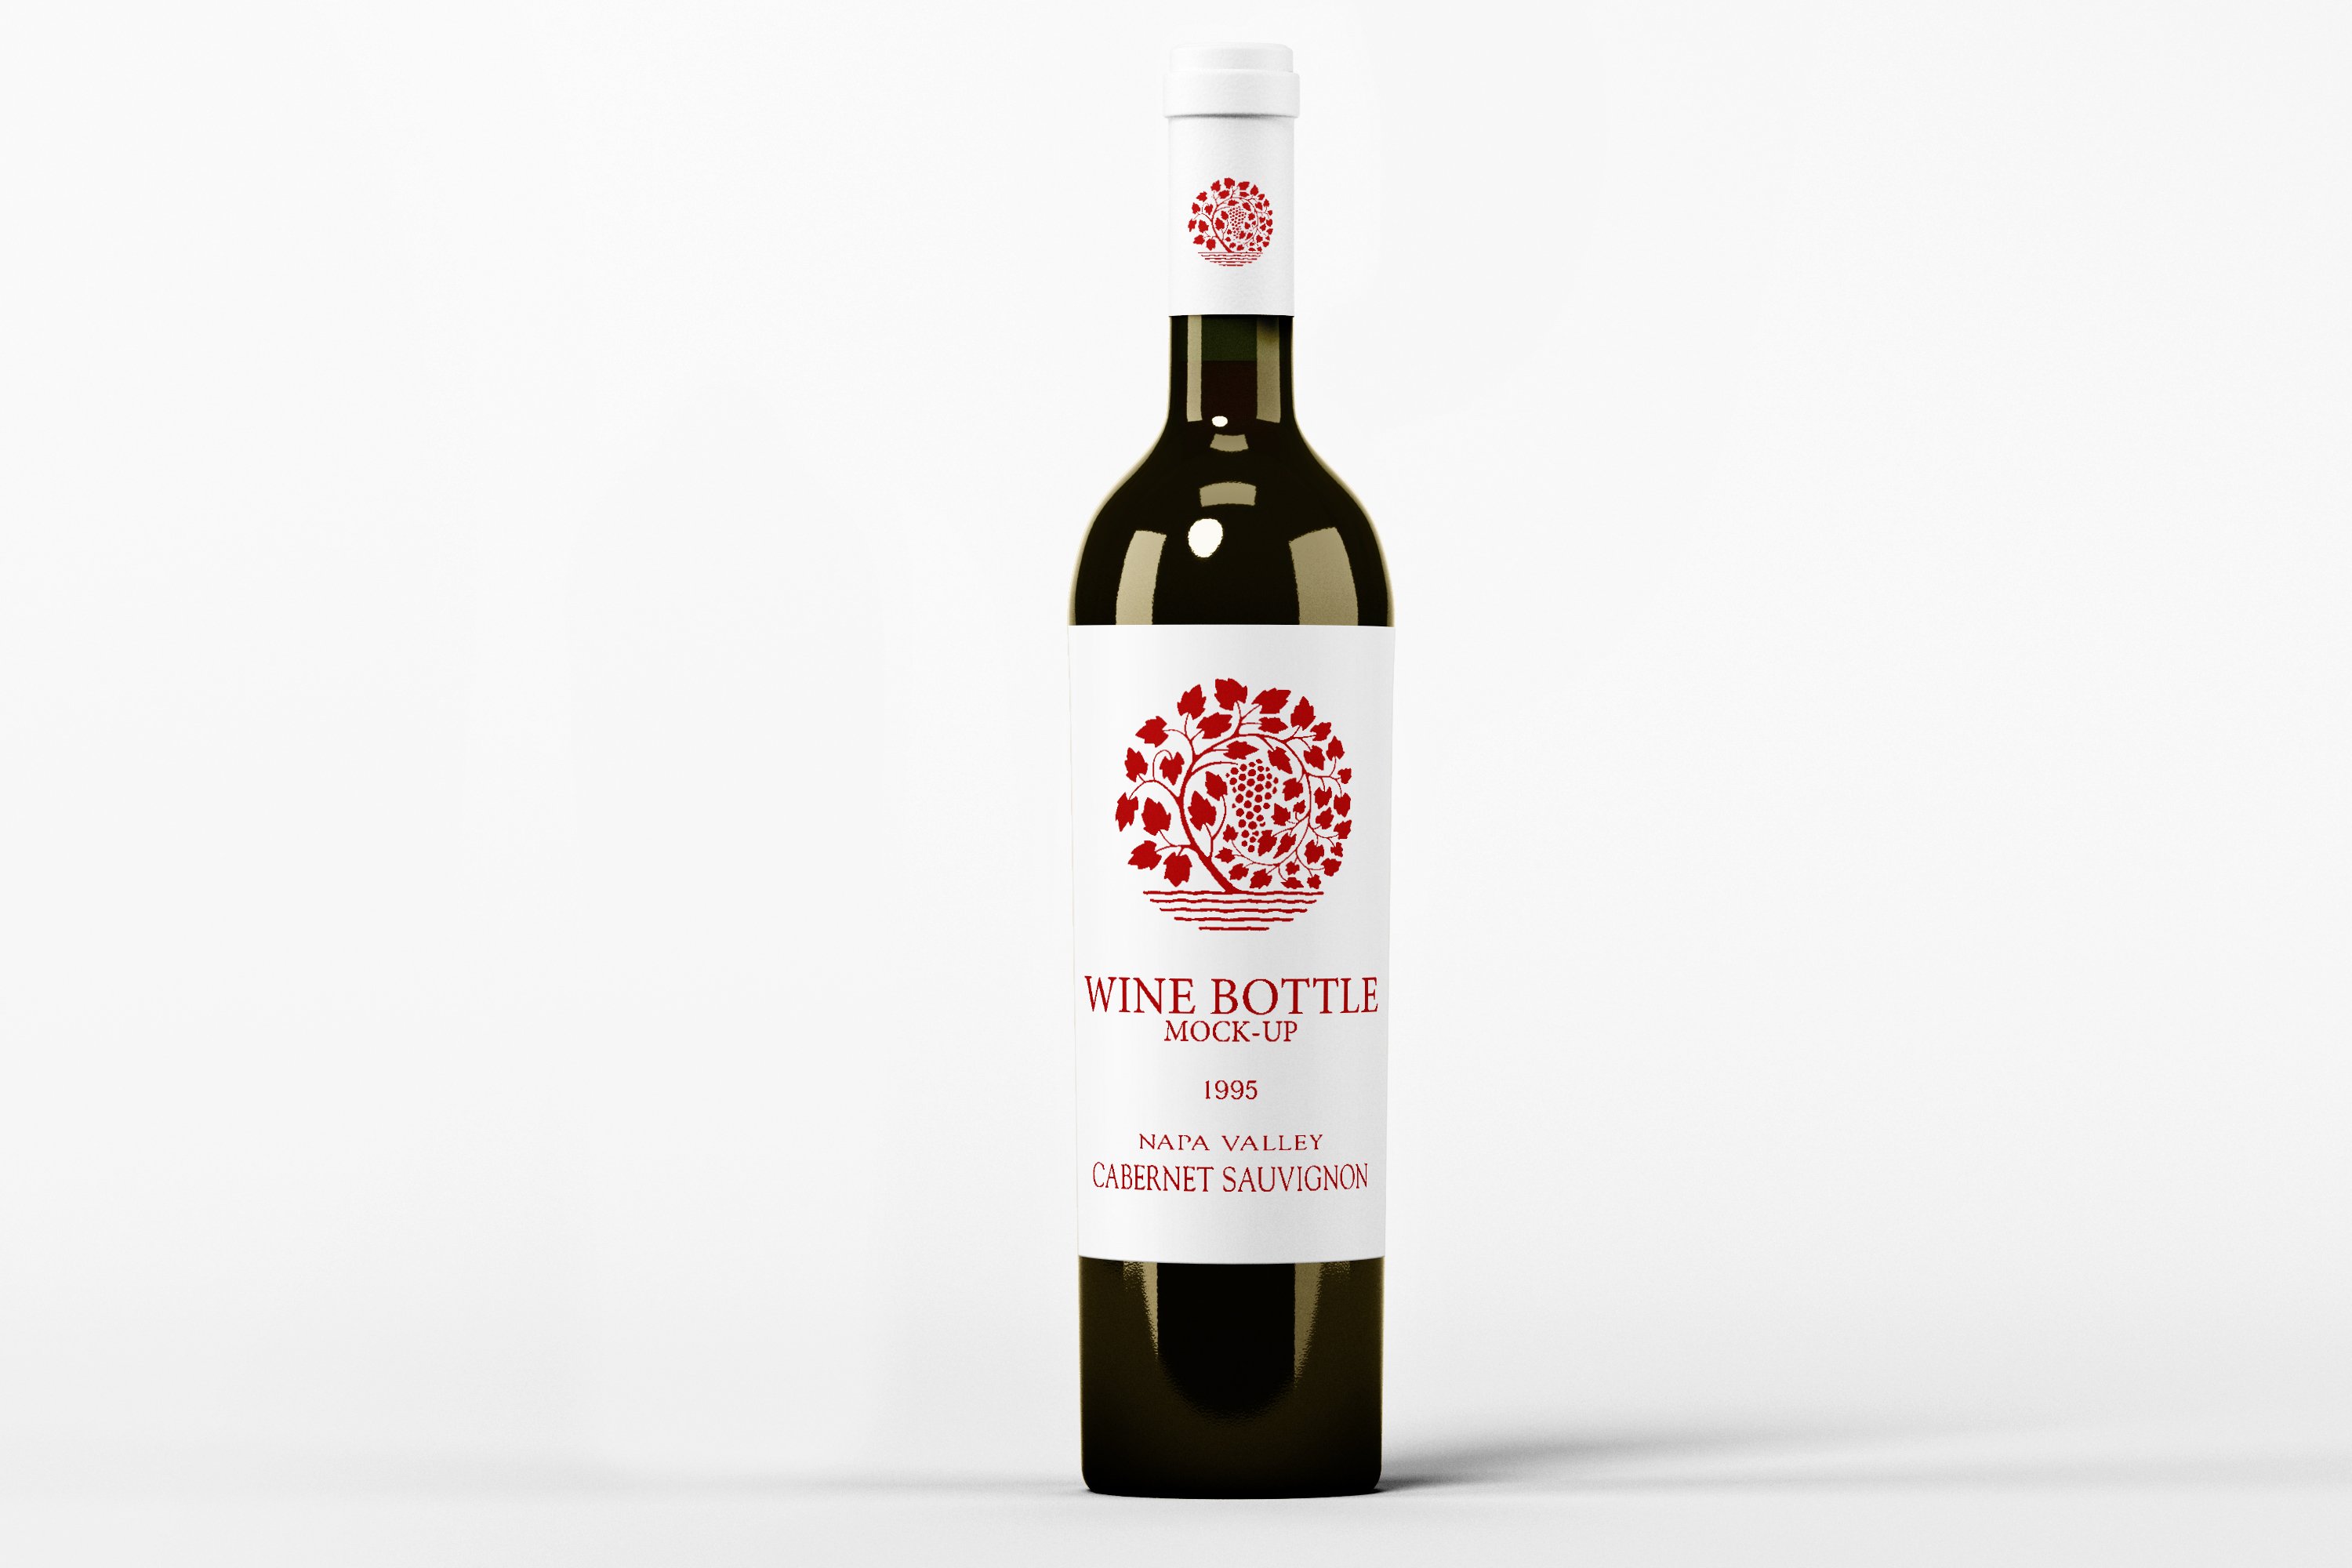 Simple white label with red flower logo.